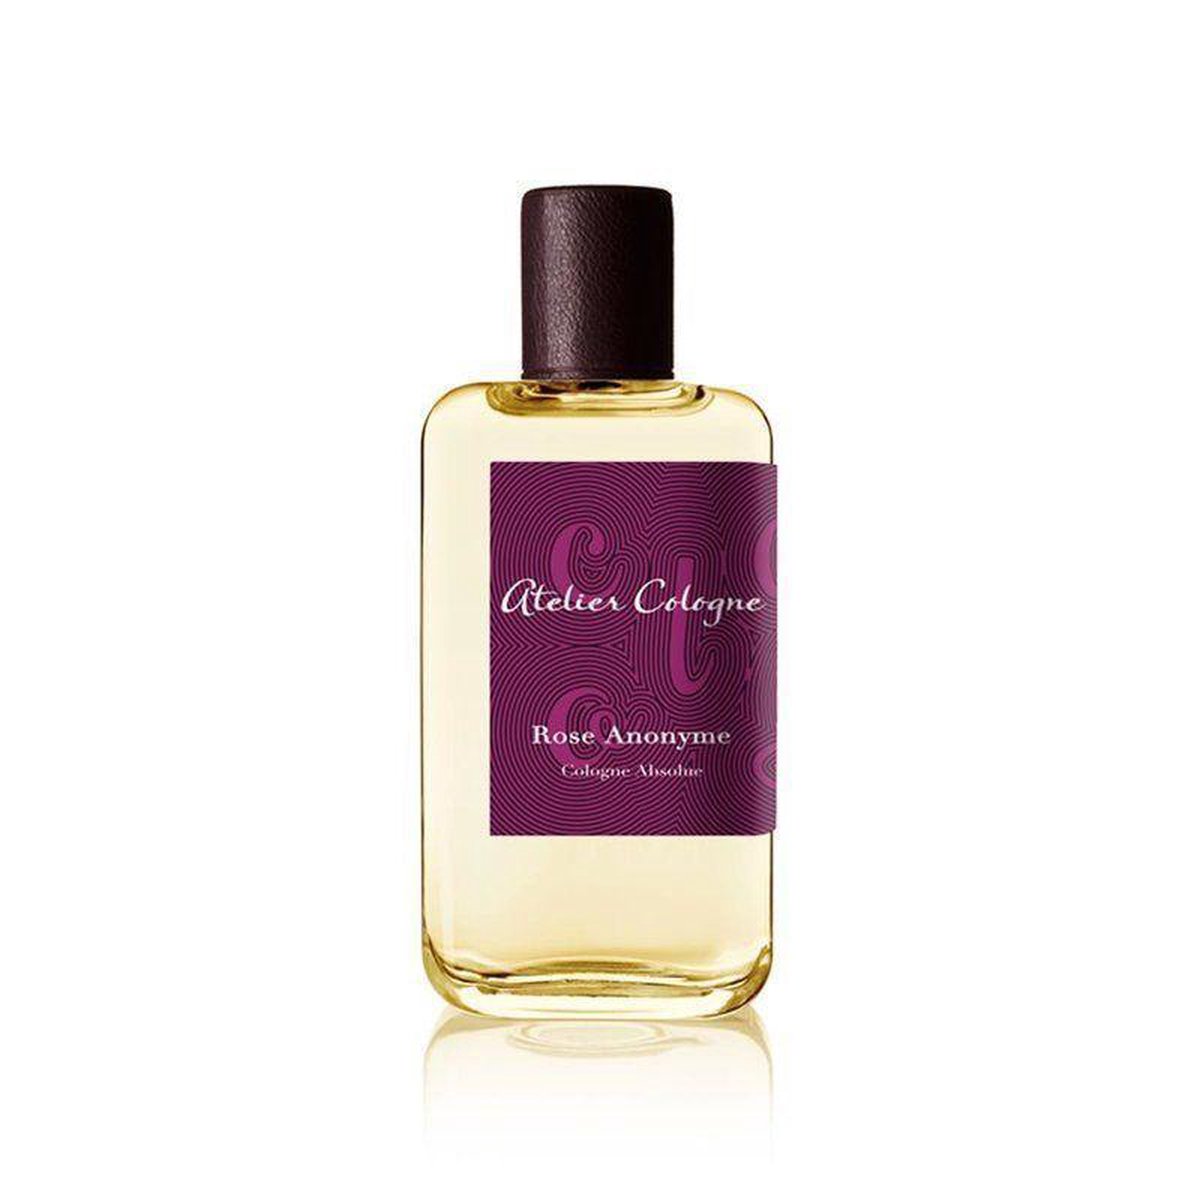 Rose Anonyme by Atelier Cologne 100 ml - Pure Perfume Spray (Unisex)